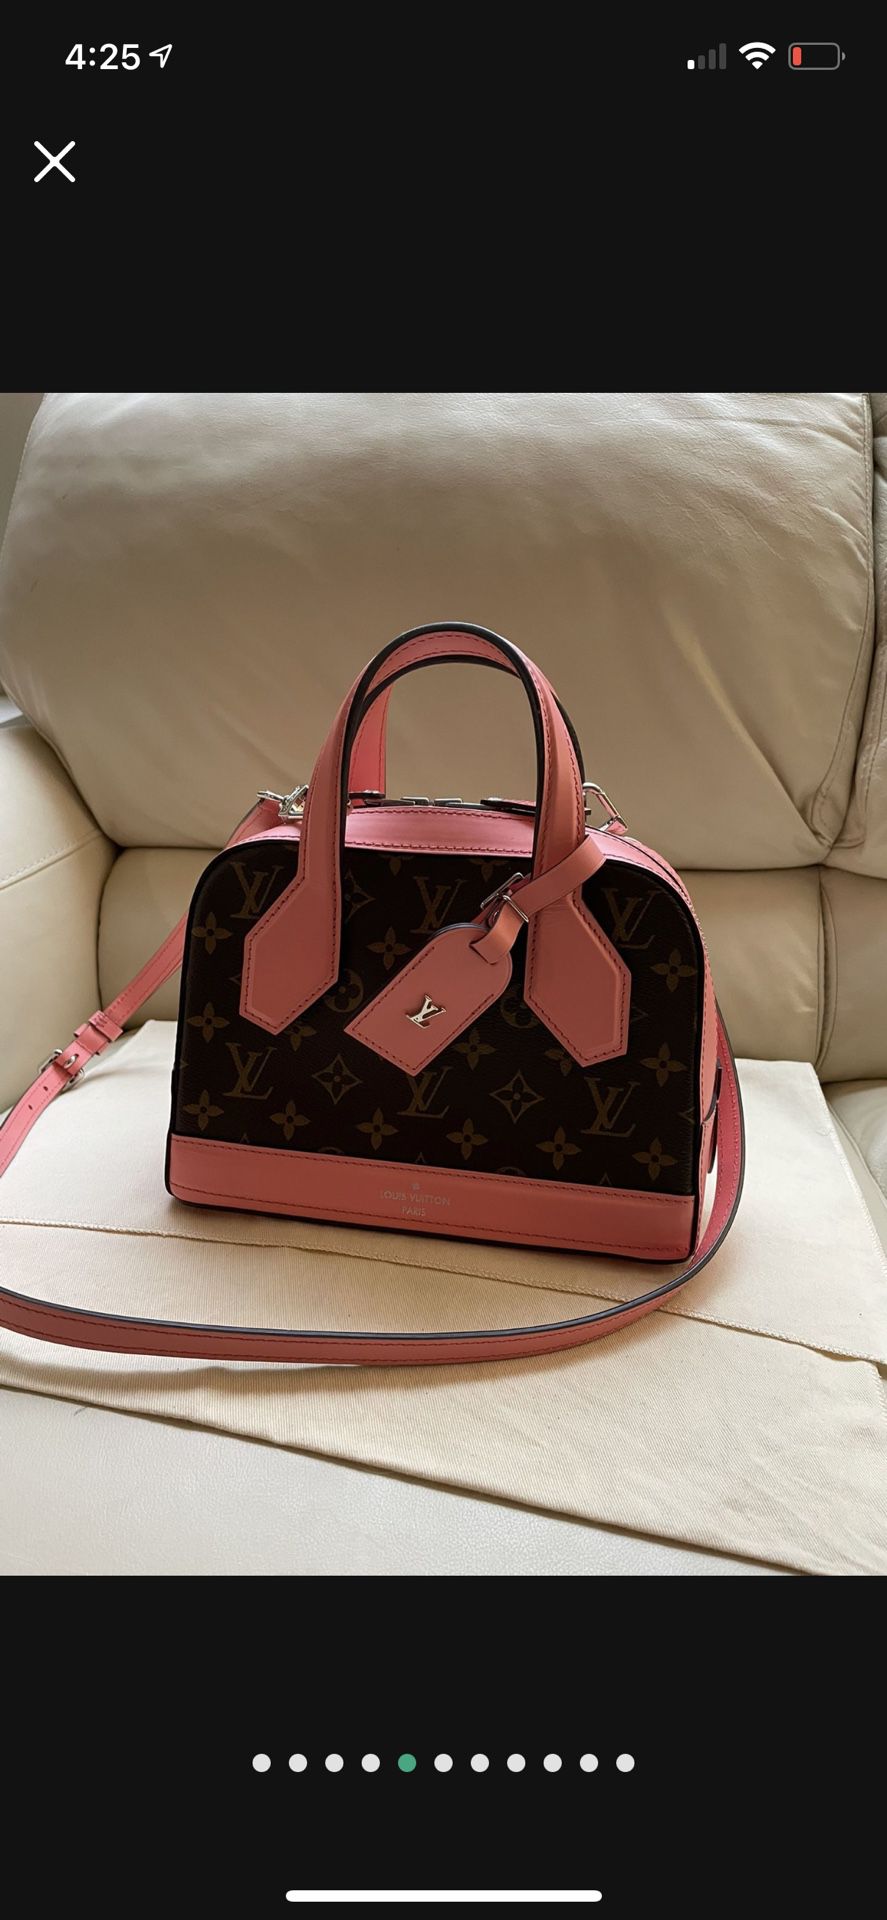 Authentic Louis Vuitton Dora Mini Bag. Limit Edition In Very Good Condition . Bought $3000 Asking $2000